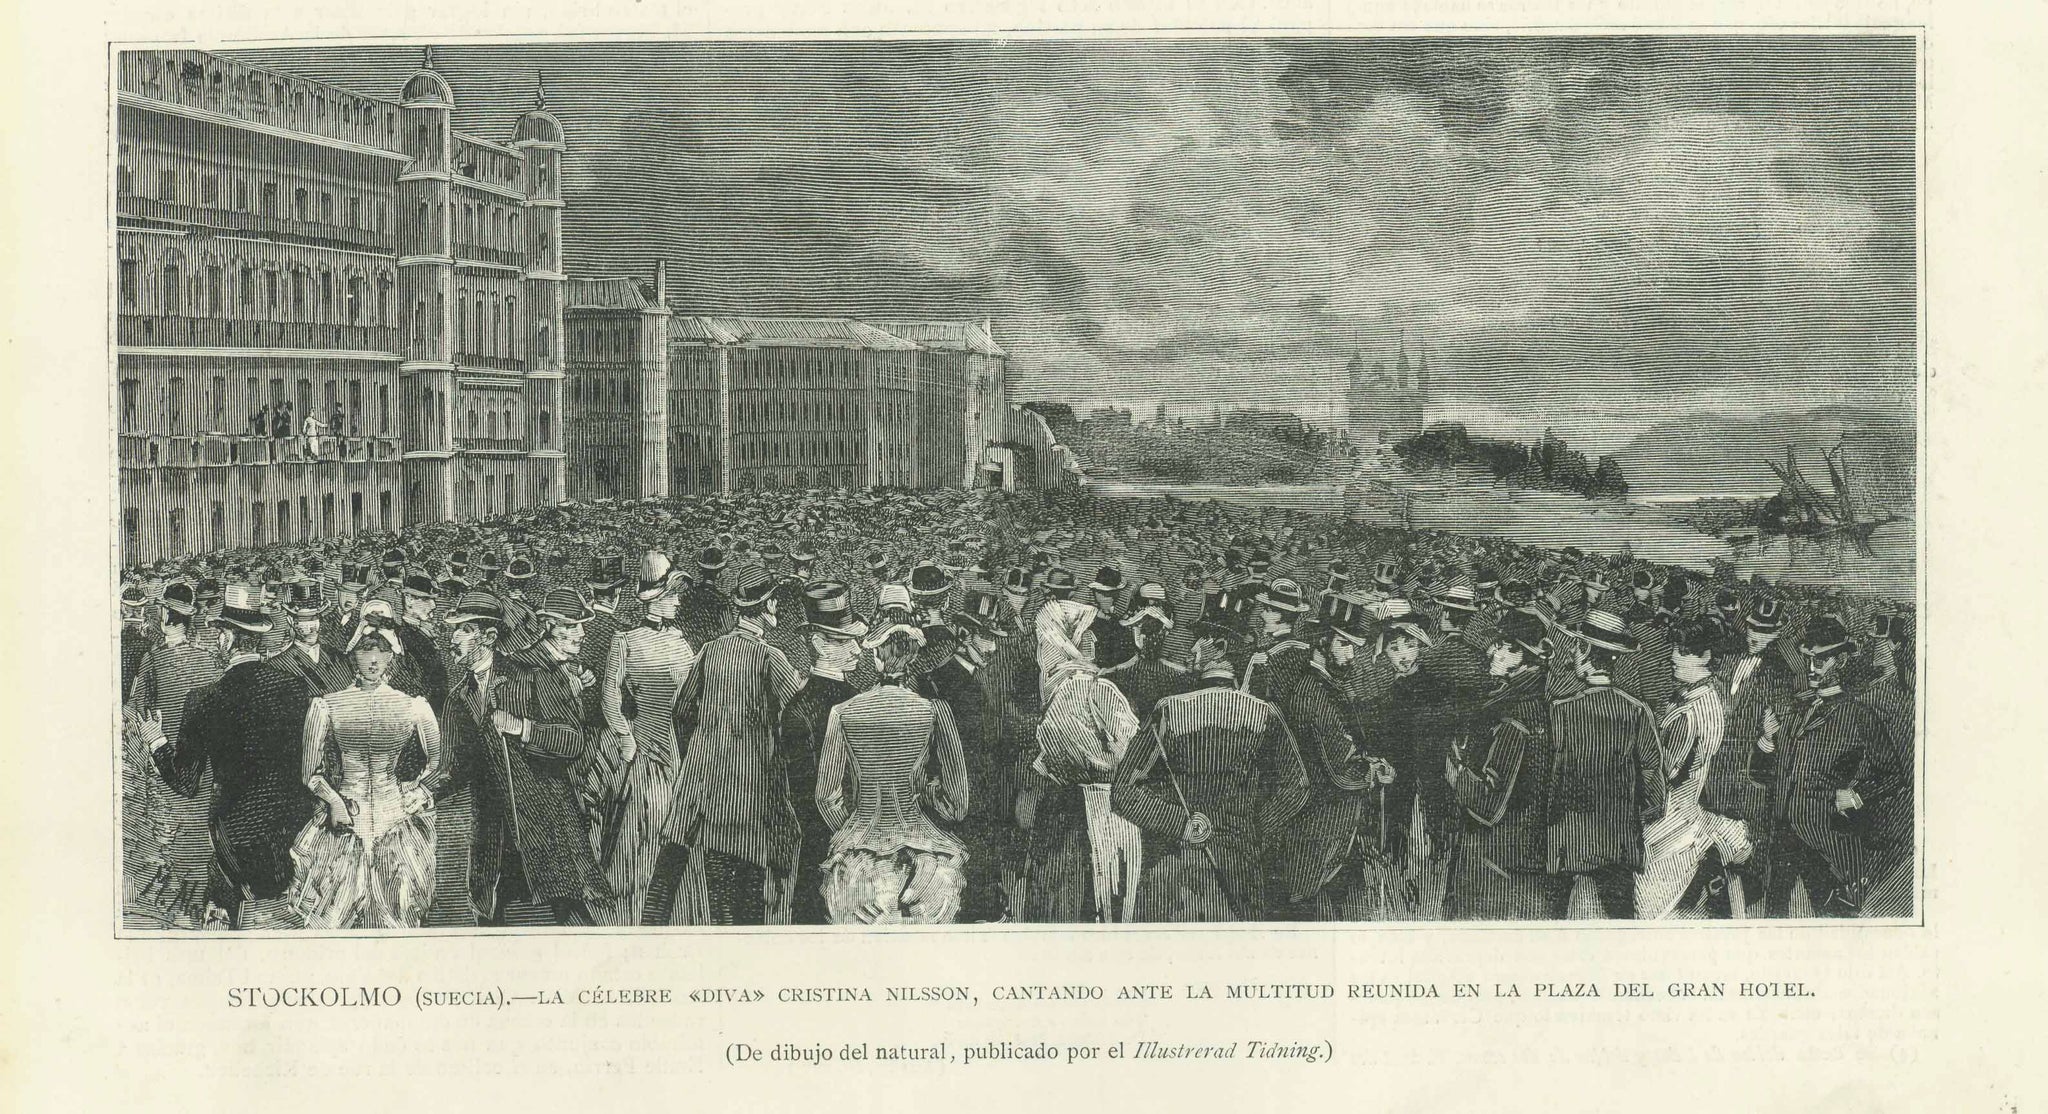 "Stockholmo (Suecia). - La Celebre "Diva" Christina Nilsson, Cantando Ante La Multitud Reunida en La Plaza Del Gran Hotel"  Wood engraving made after a drawing and published 1885. Christina Nilsson sang from the balcony of the Grand Hotel on September 23, 1885. She was married to the Count of Casa Miranda.  Original antique print  